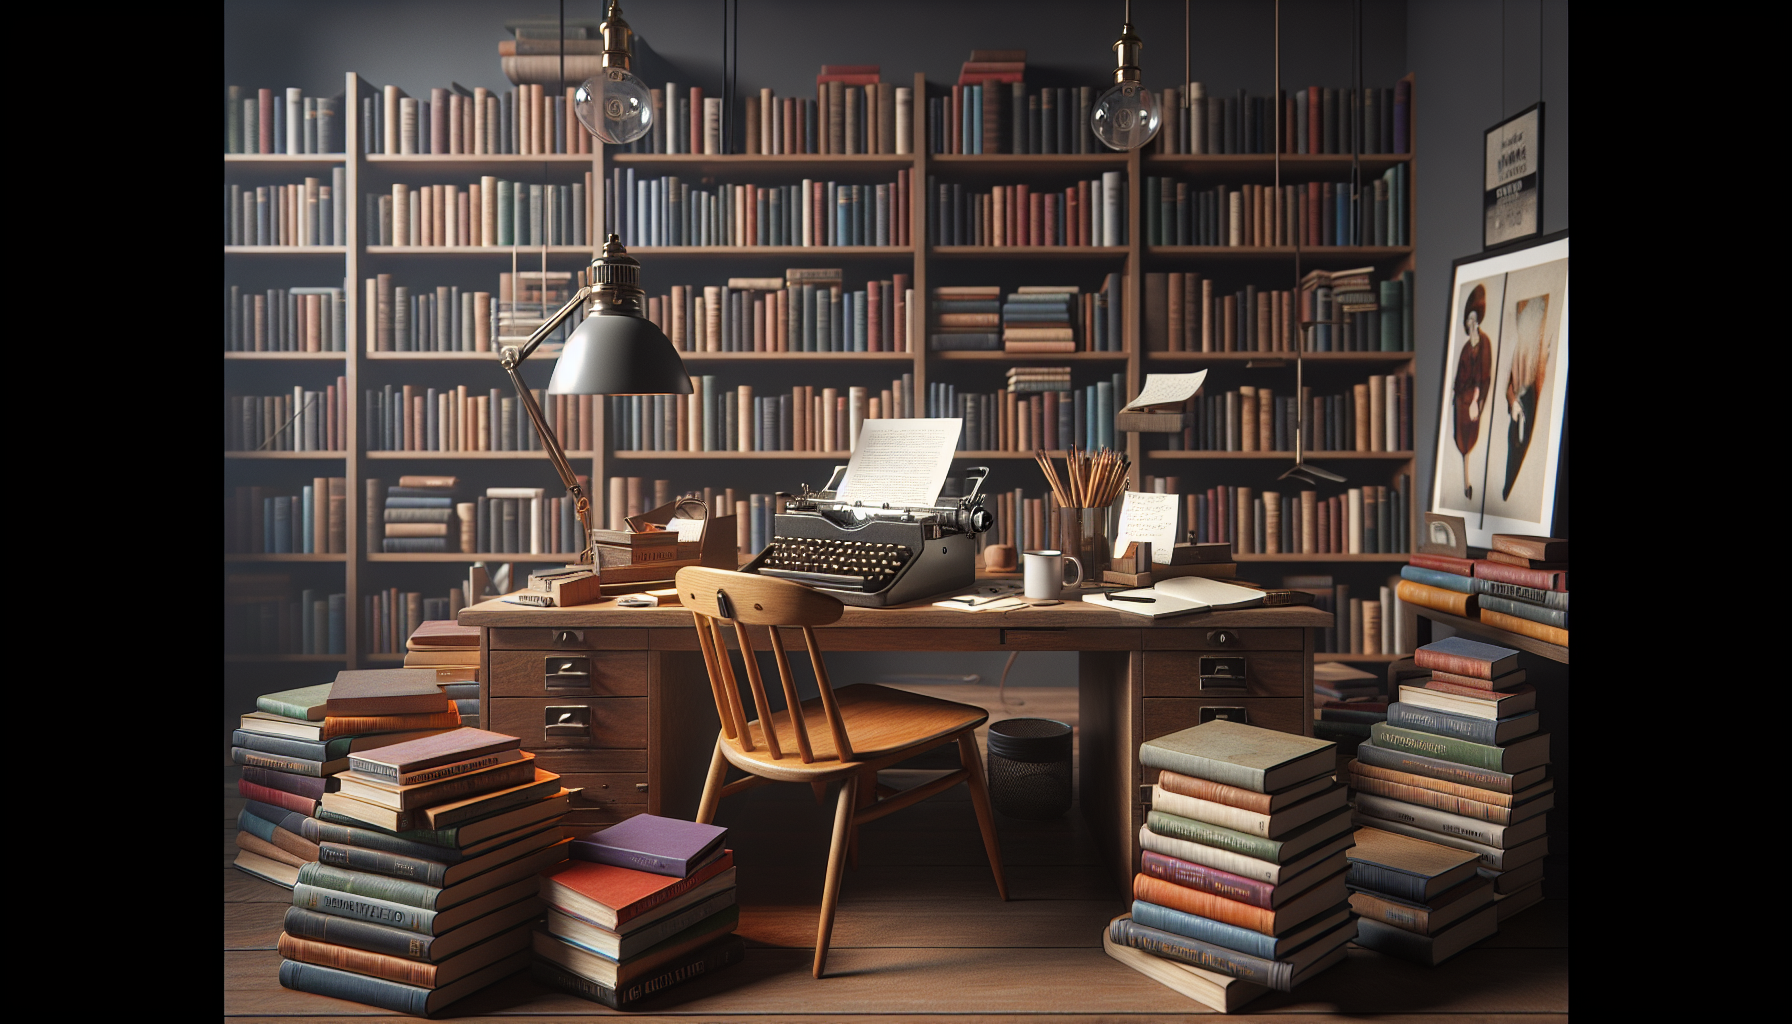 An artistic study room filled with books on screenwriting, scattered around in a cozy, warm setting with a vintage typewriter, notes and coffee on a wooden desk, dimly lit by a classic desk lamp, in a